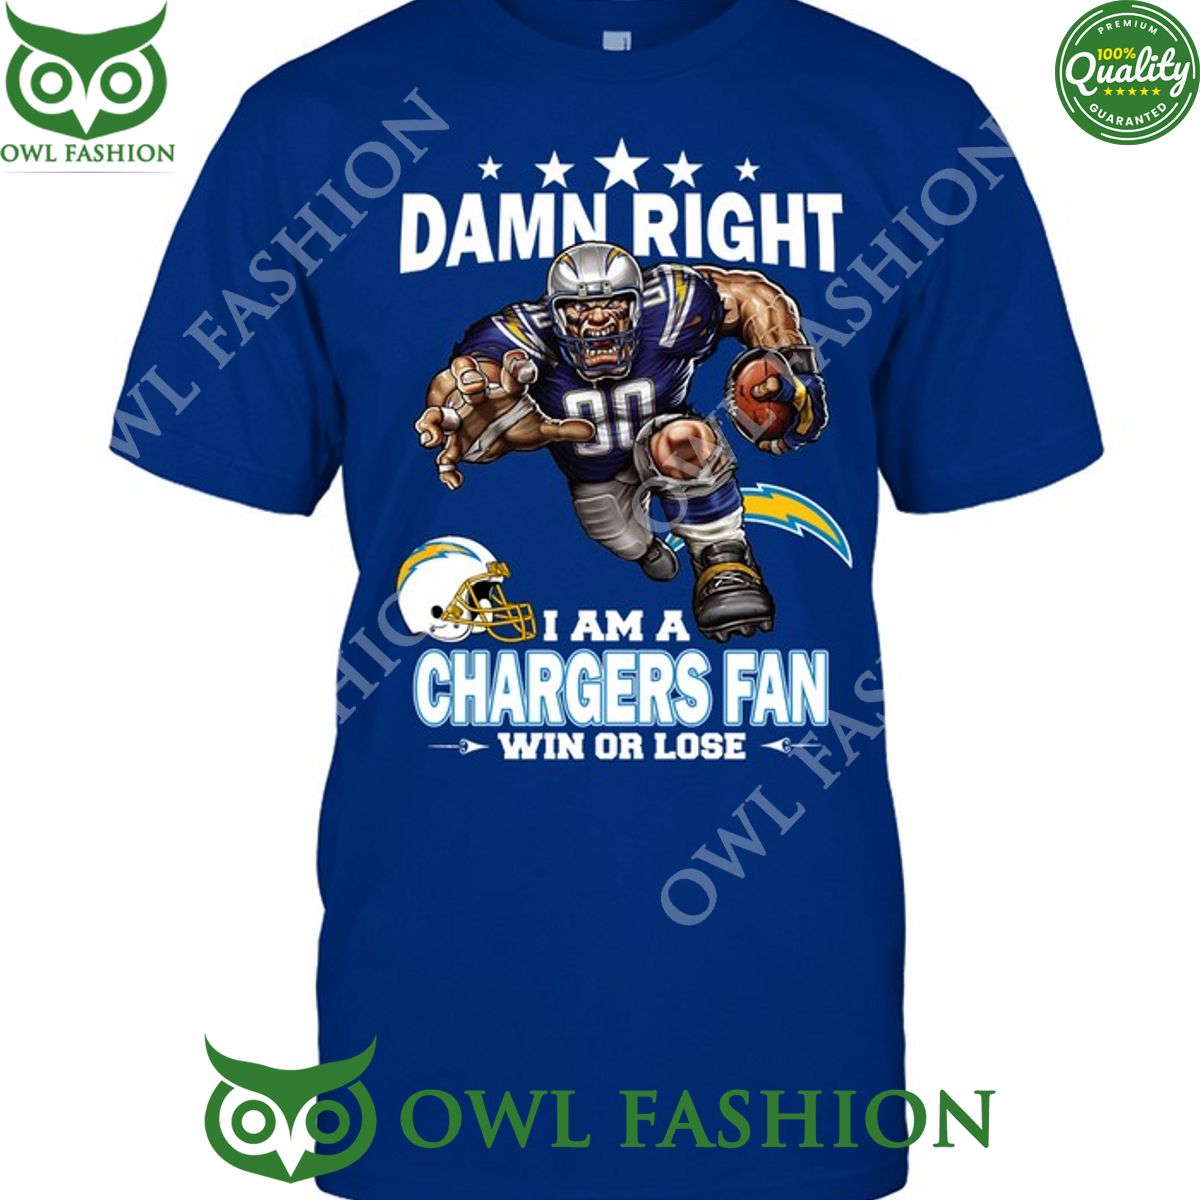 damn right los angeles chargers nfl fan win or lose t shirt 1 imnt9.jpg